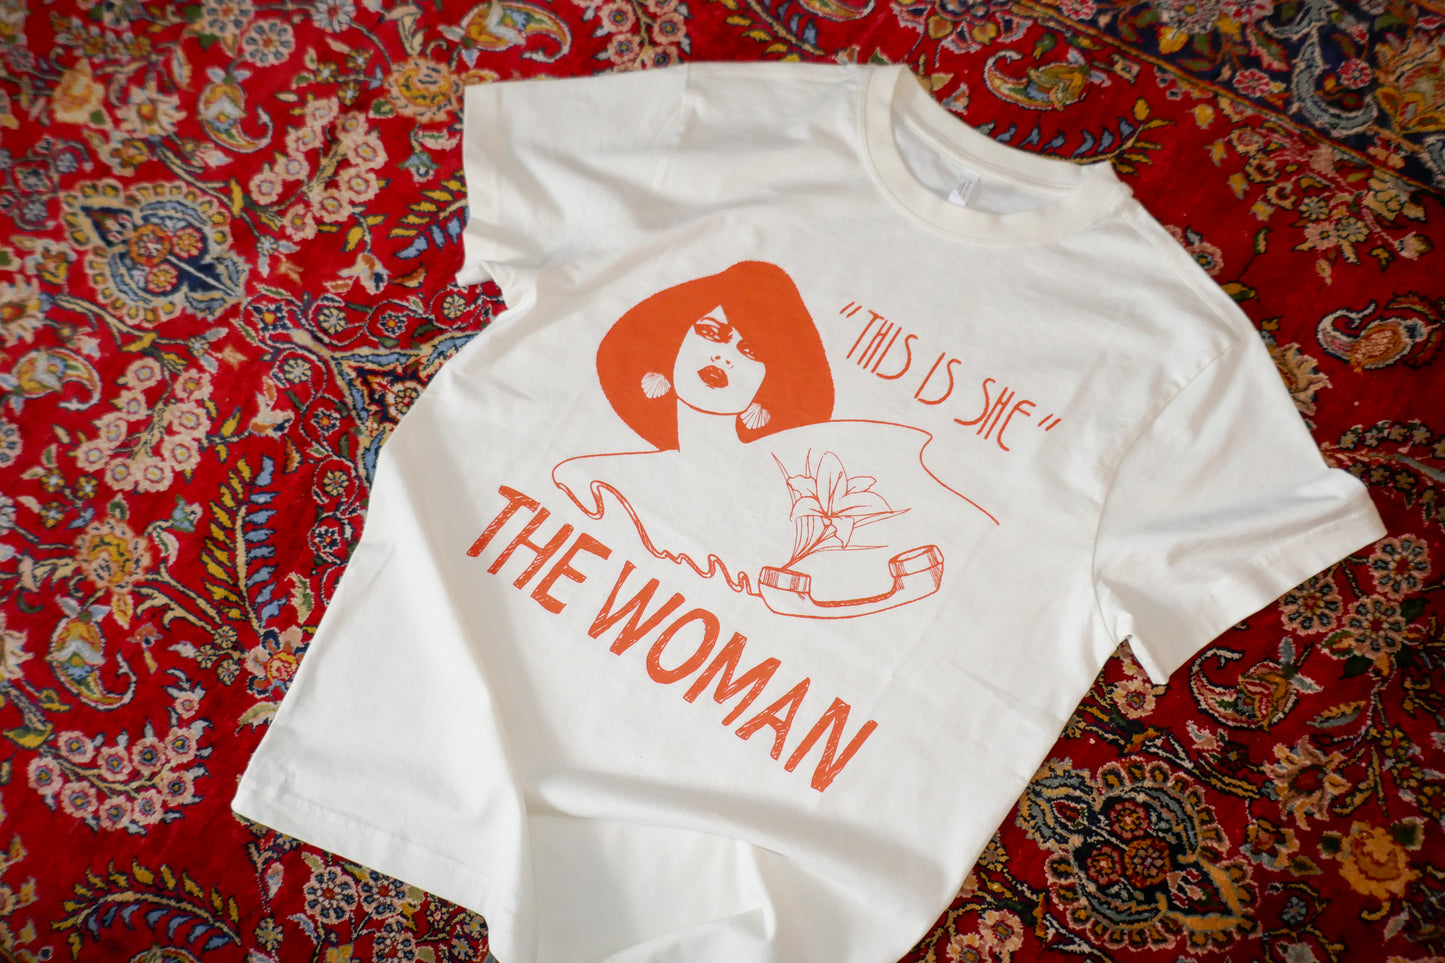 "This is She" Tee